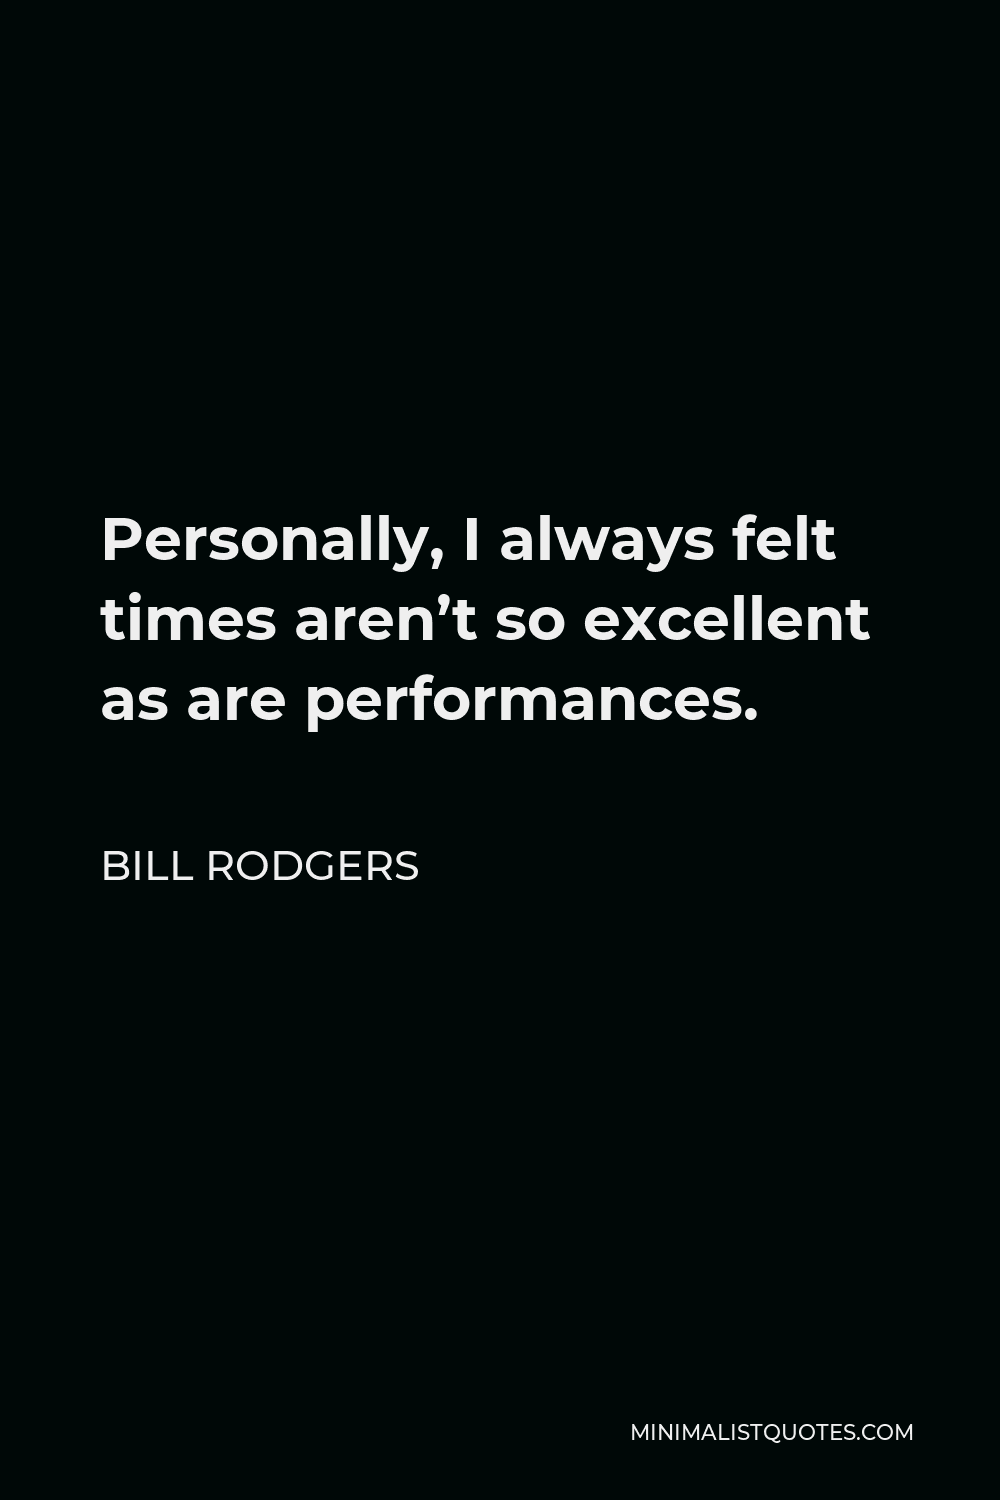 Bill Rodgers Quote - Personally, I always felt times aren’t so excellent as are performances.